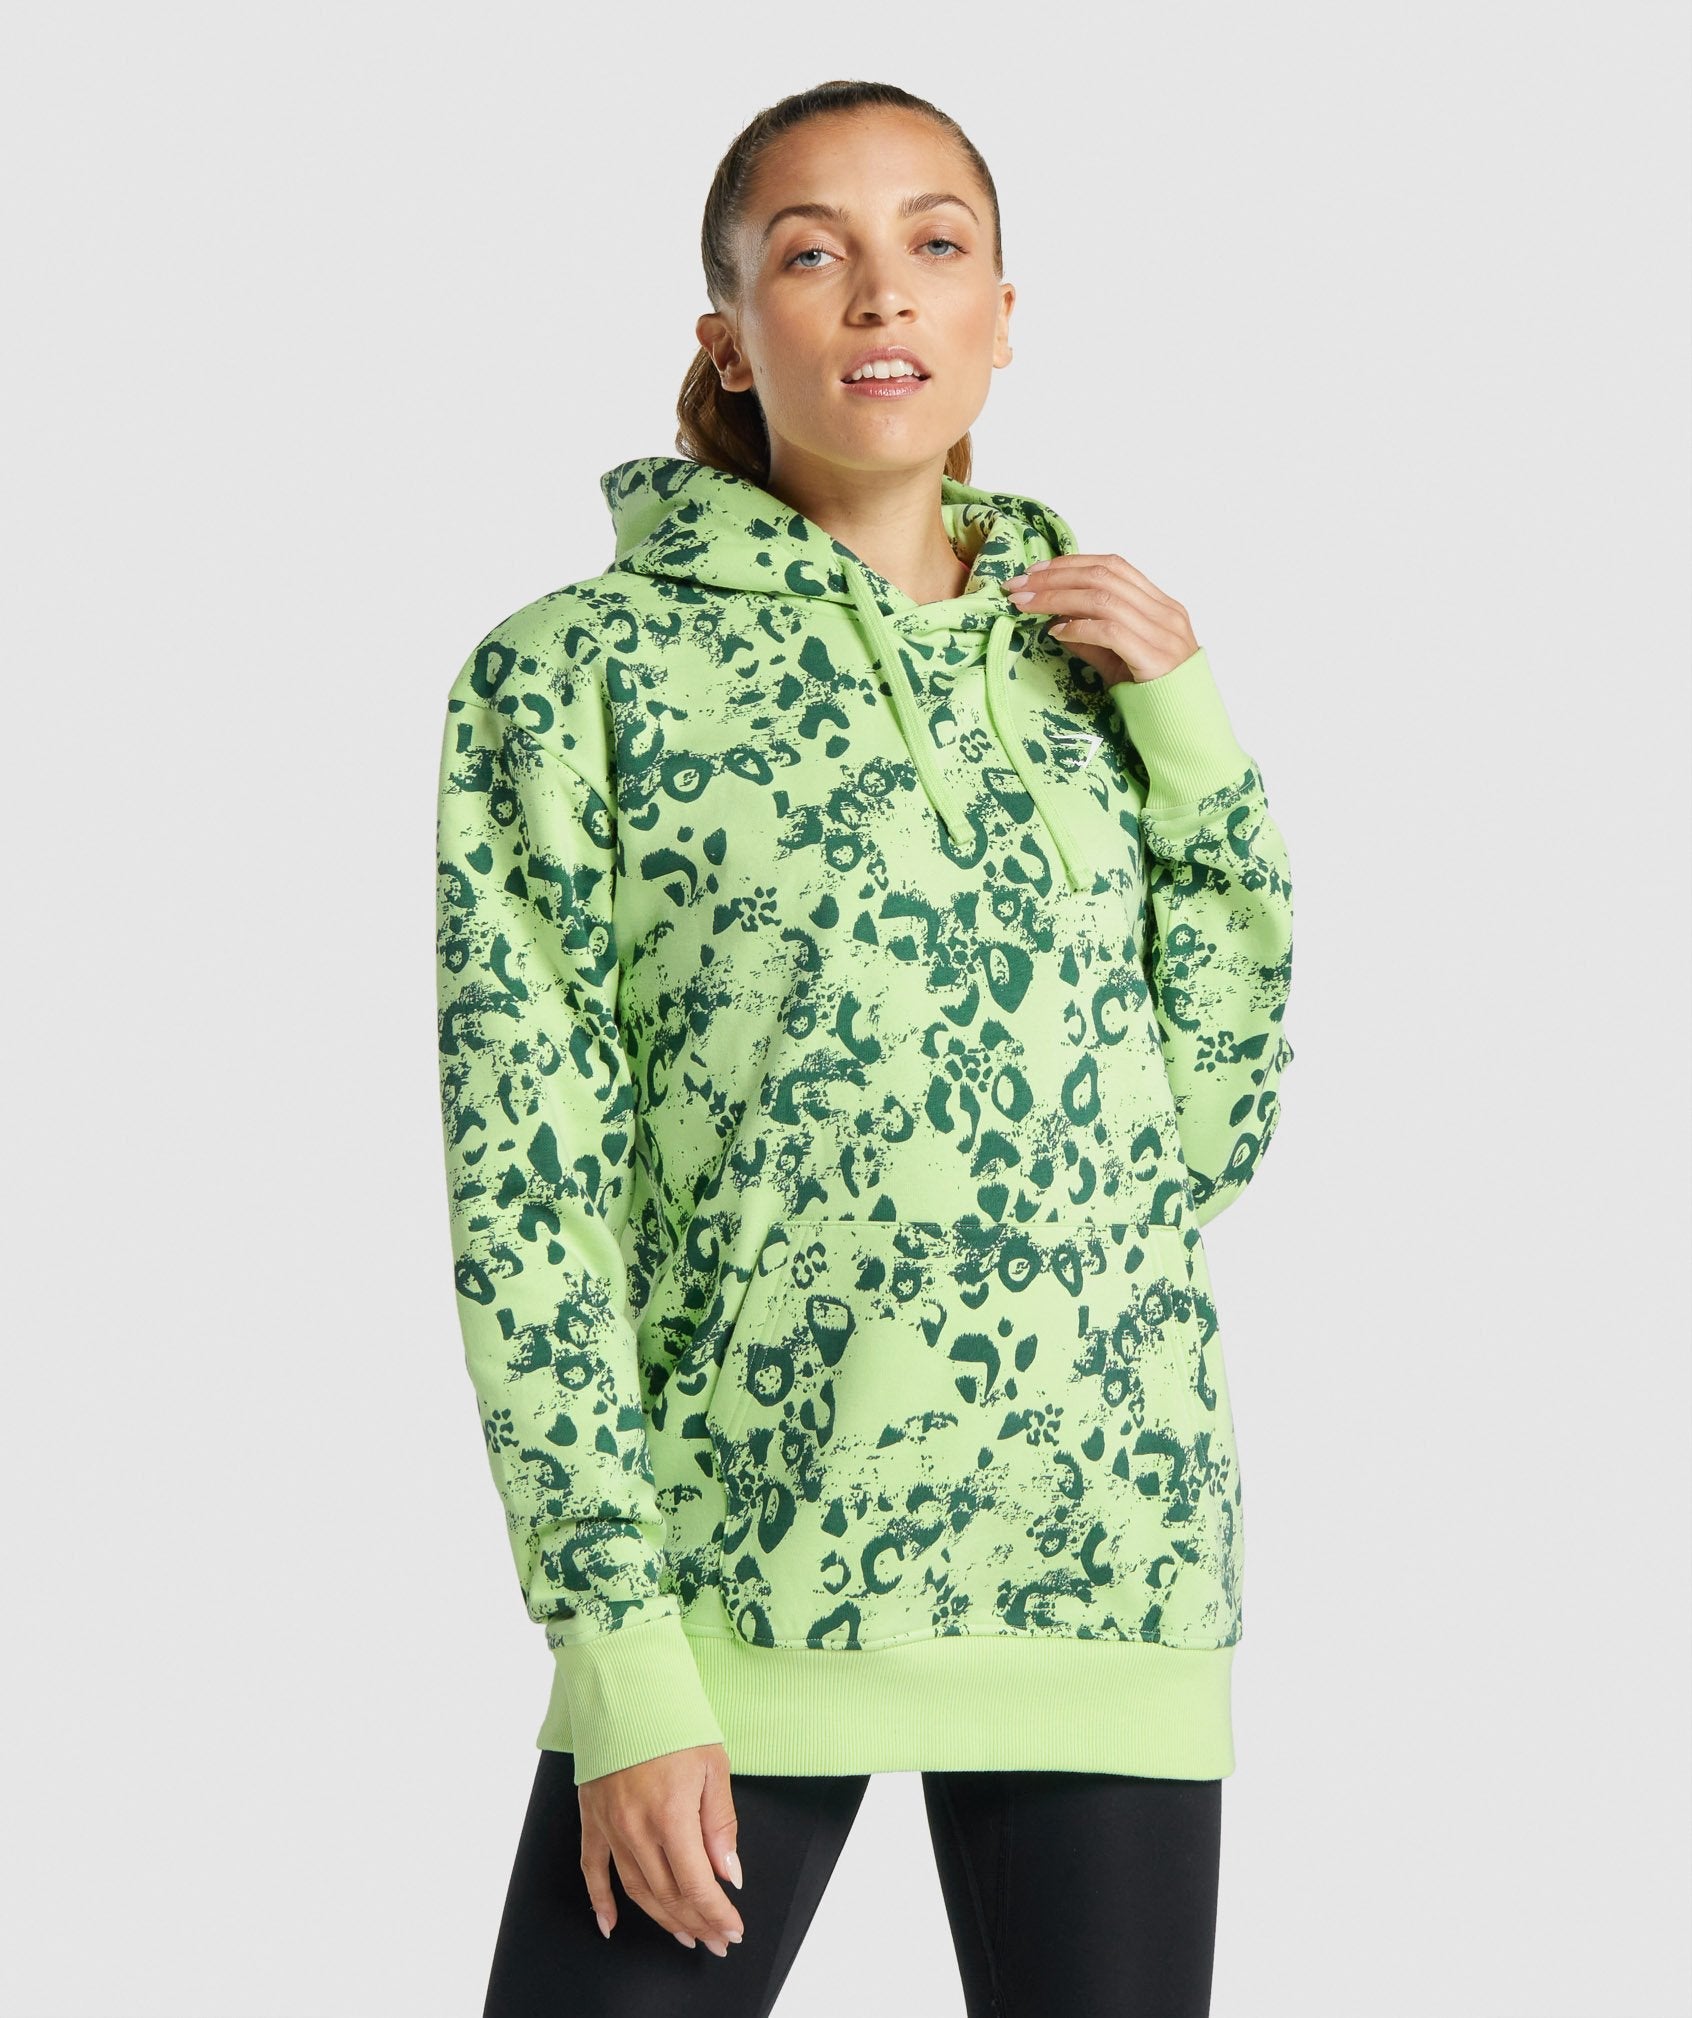 Animal Graphic Hoodie in Lime/Dark Green Print - view 1